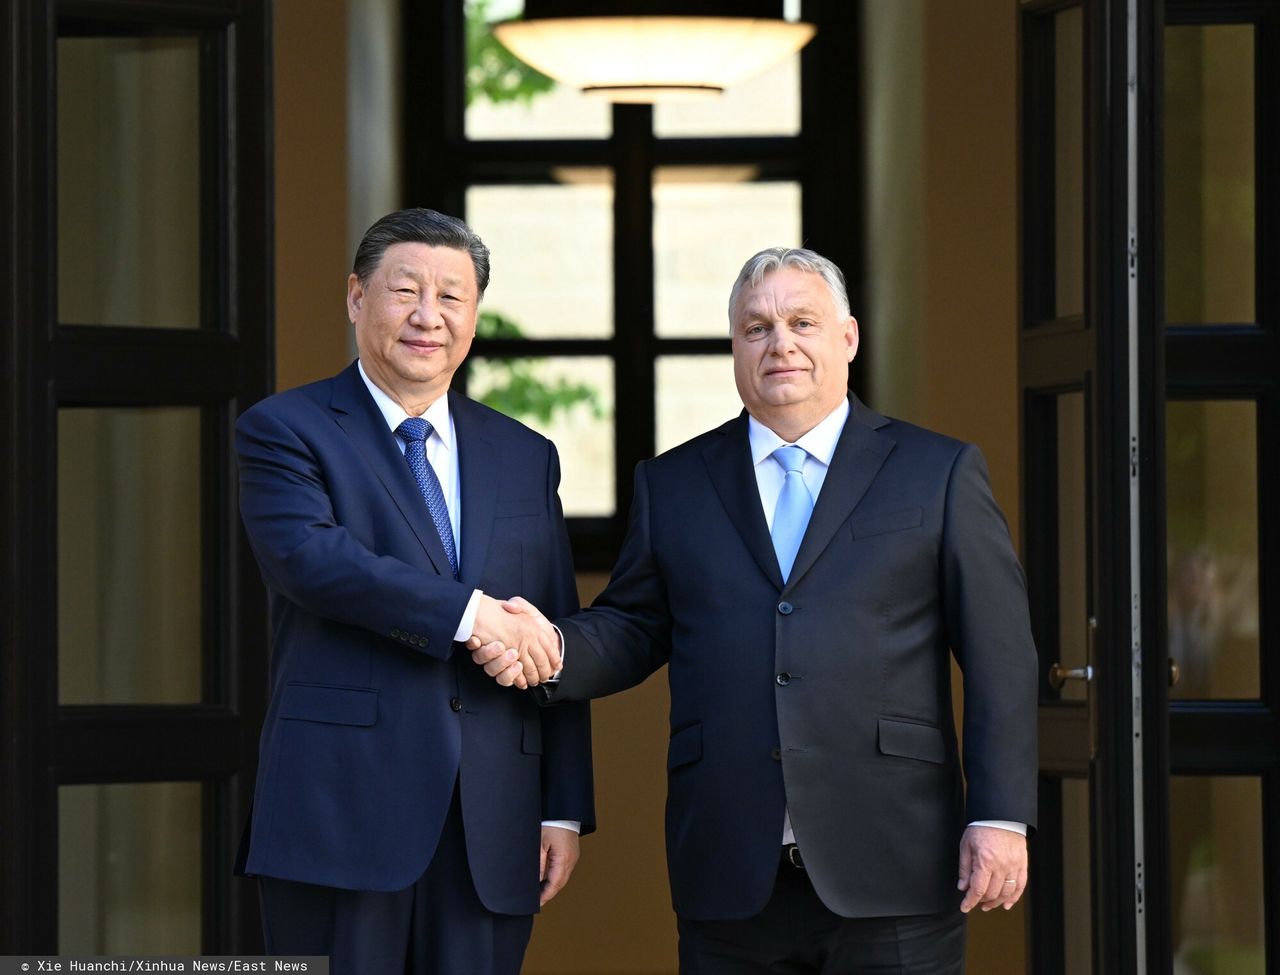 Hungary deepens ties with China through strategic agreements and BRI ventures